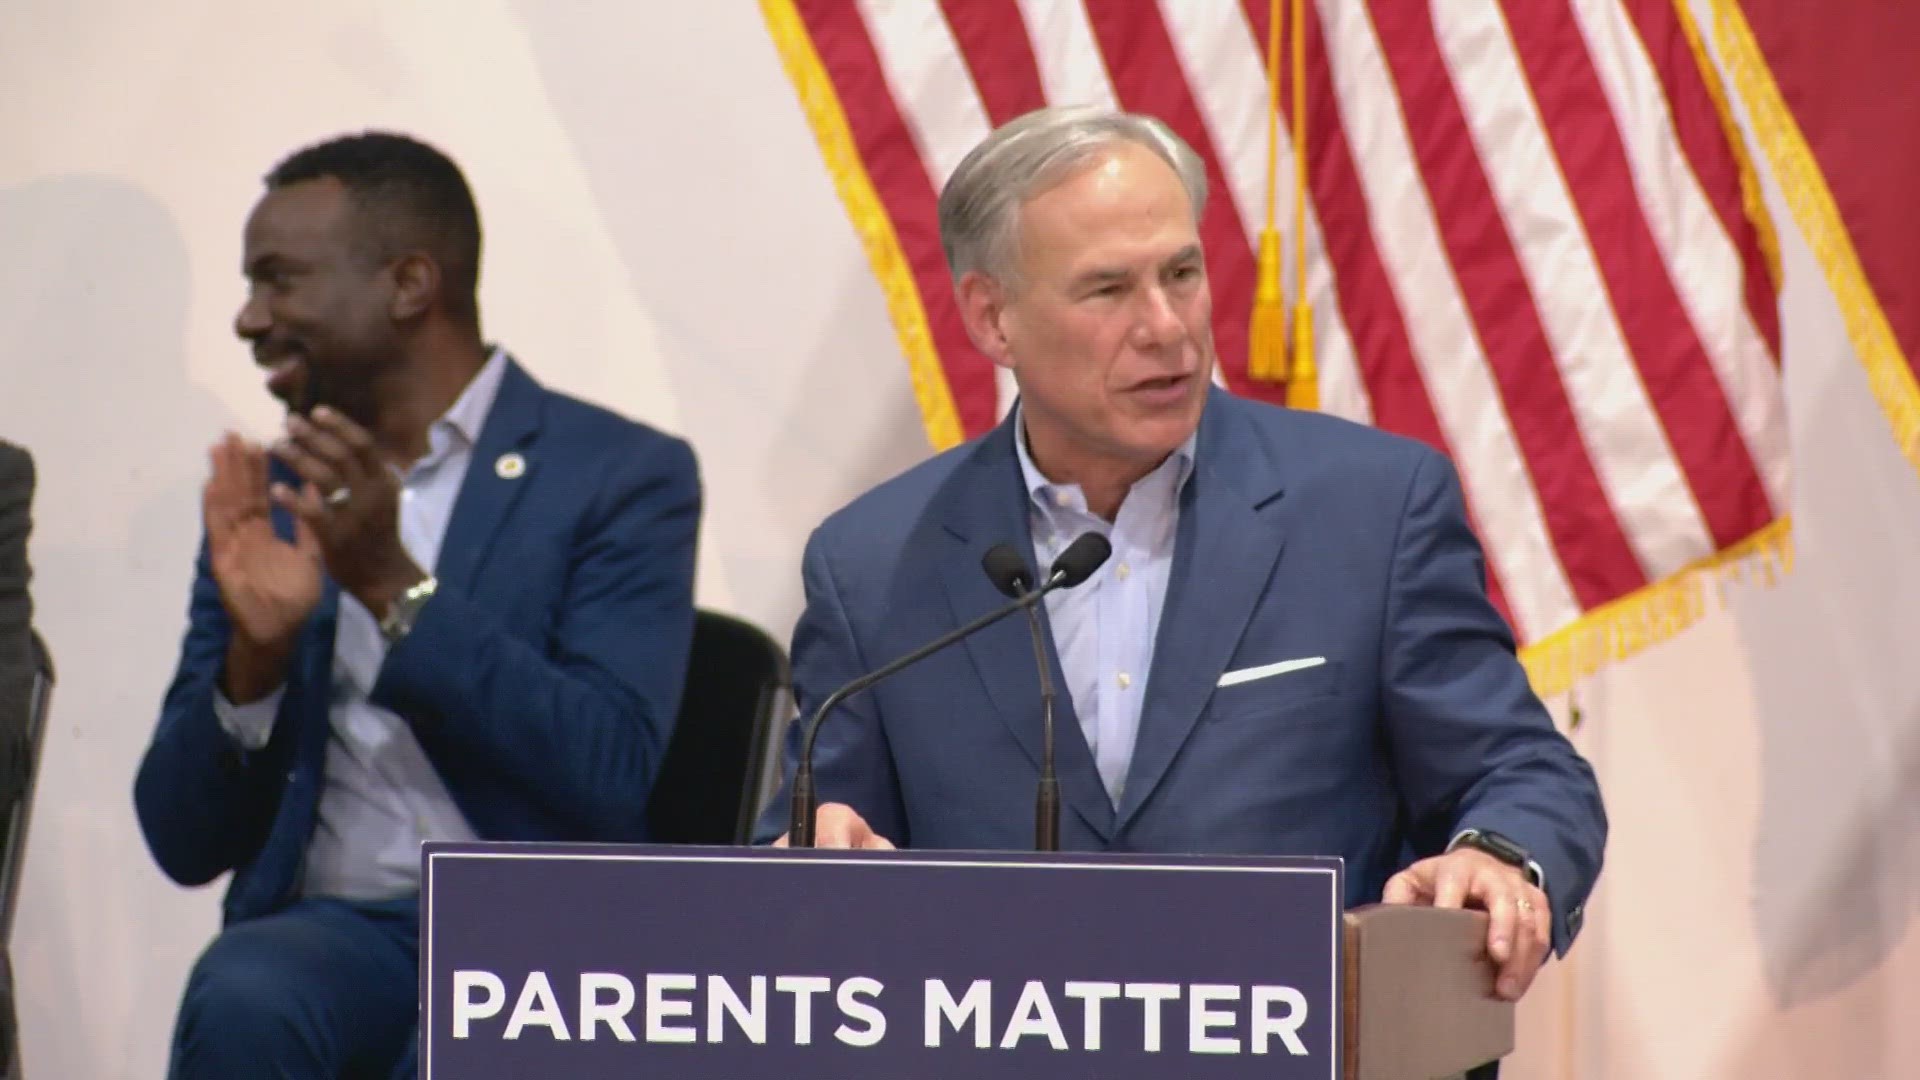 The governor continued promoting his school vouchers initiative, which is facing opposition in the Texas Legislature.